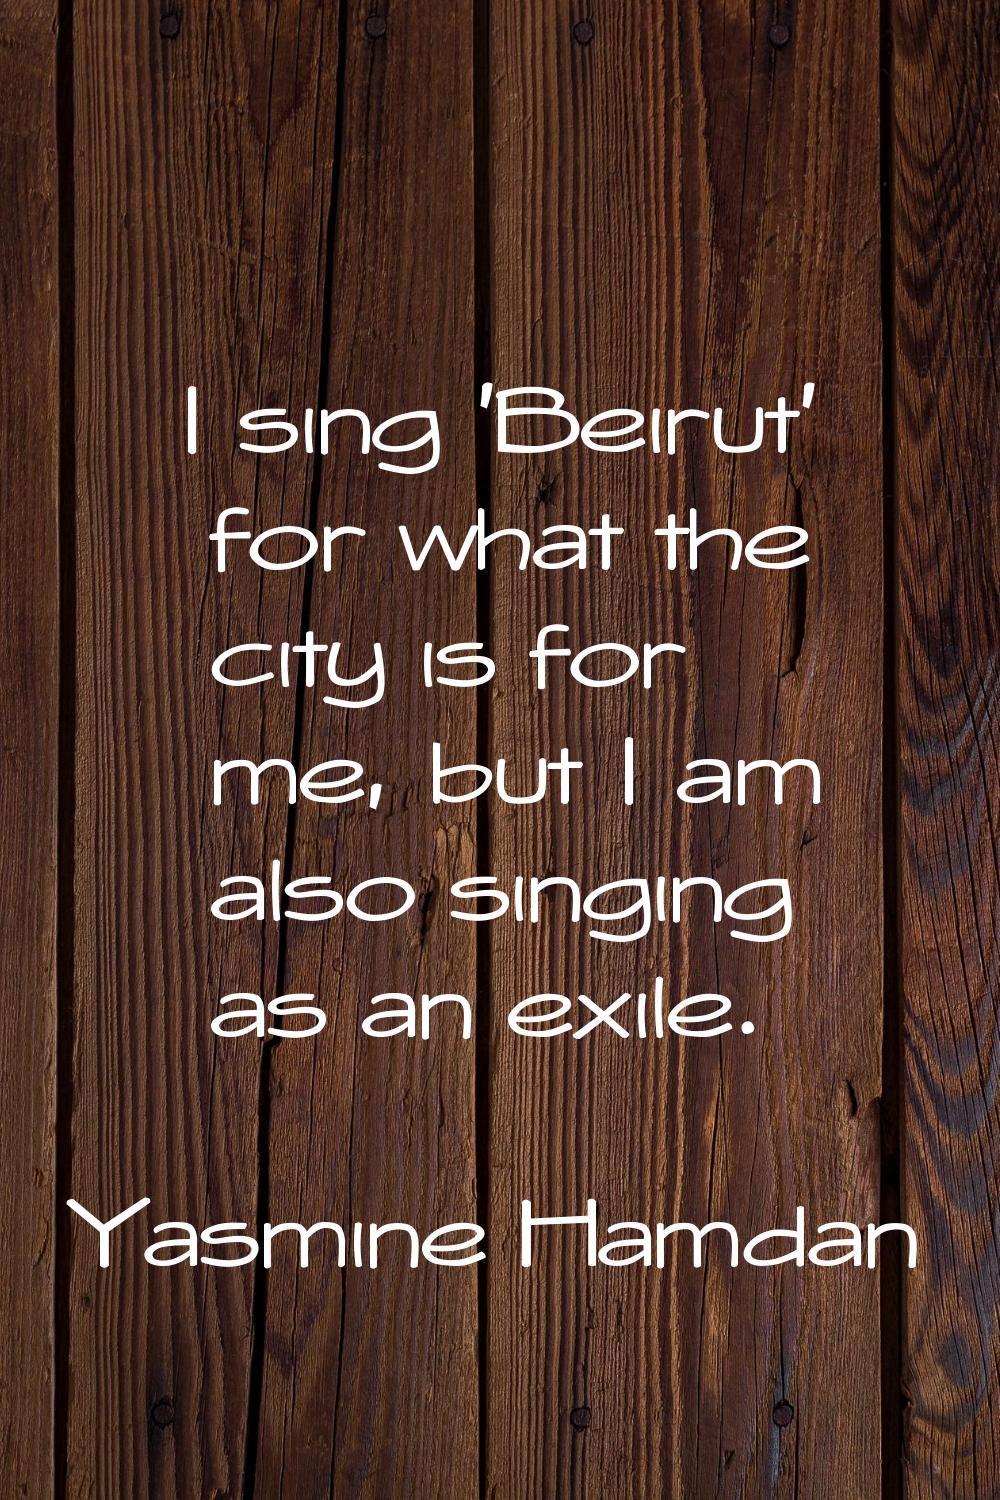 I sing 'Beirut' for what the city is for me, but I am also singing as an exile.